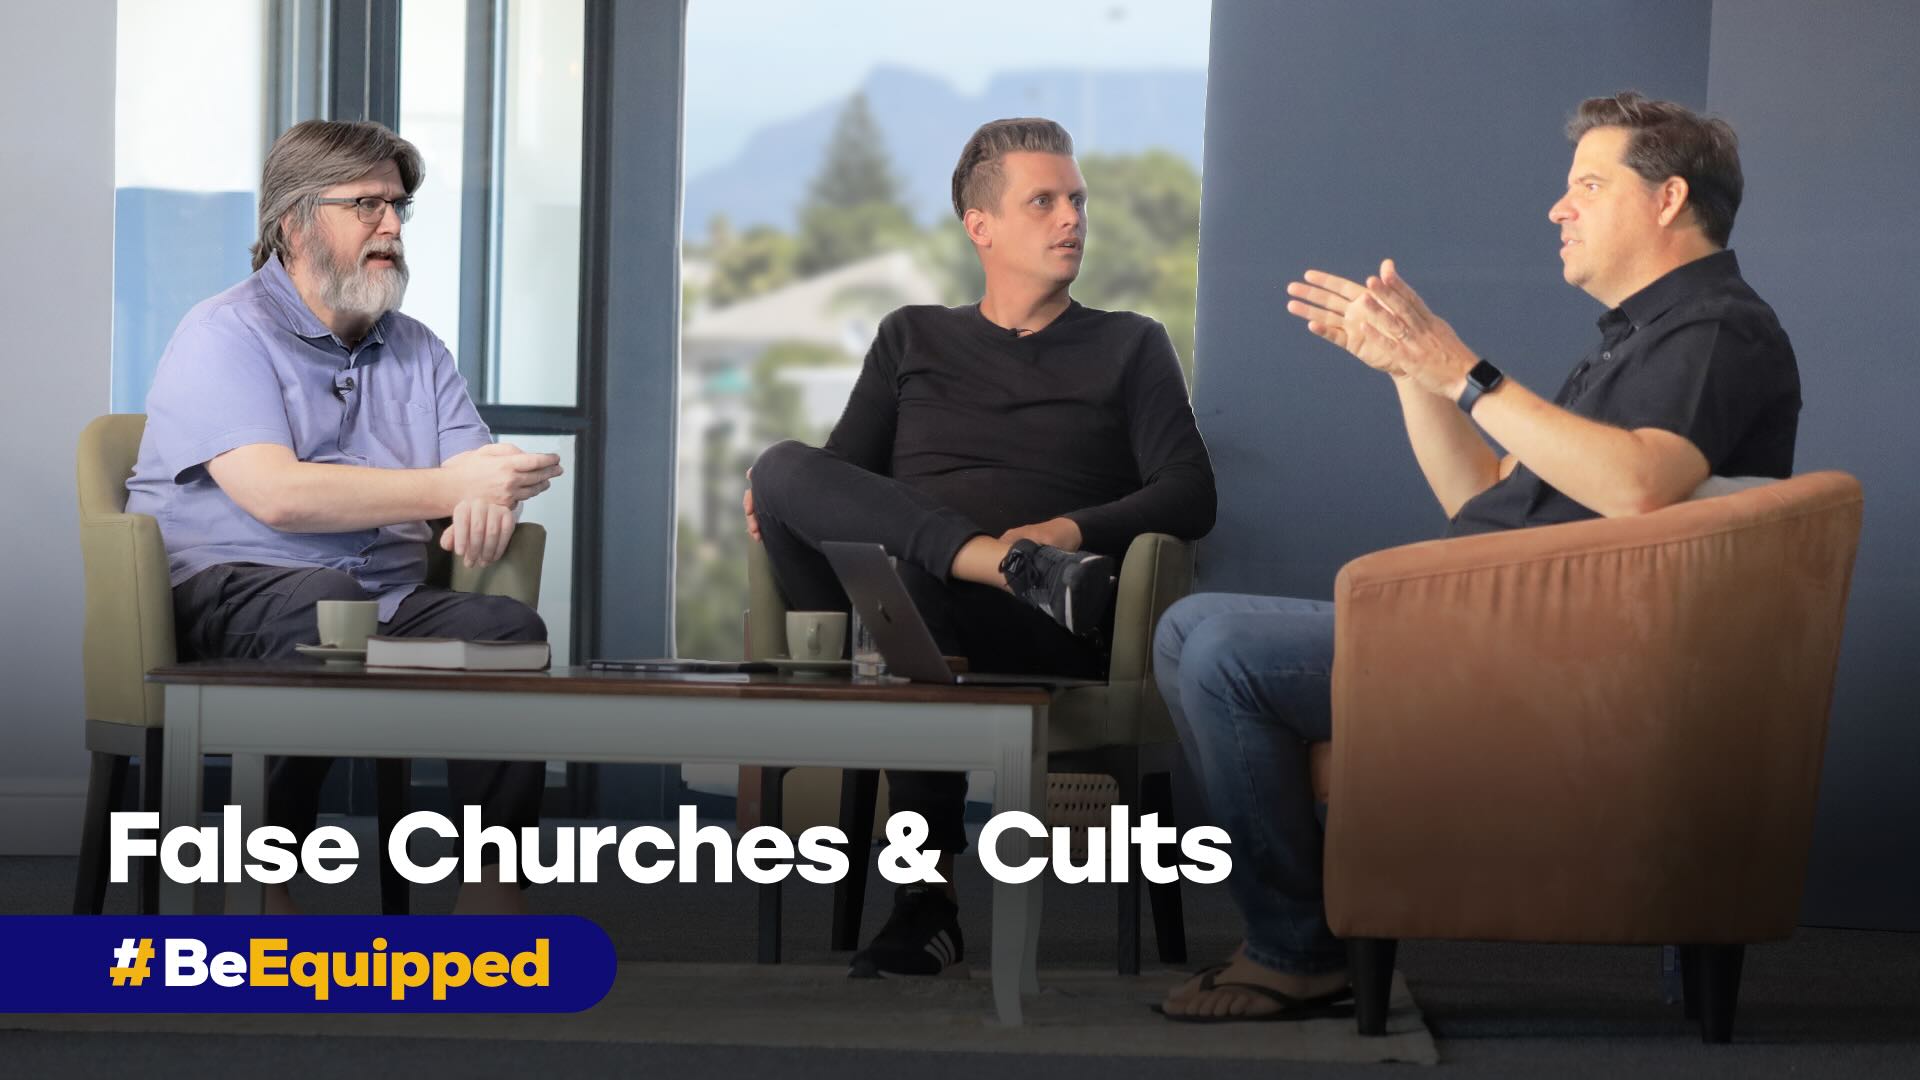 Image for ‘False Churches & Cults’ about how cults compare to the true church of Christ.